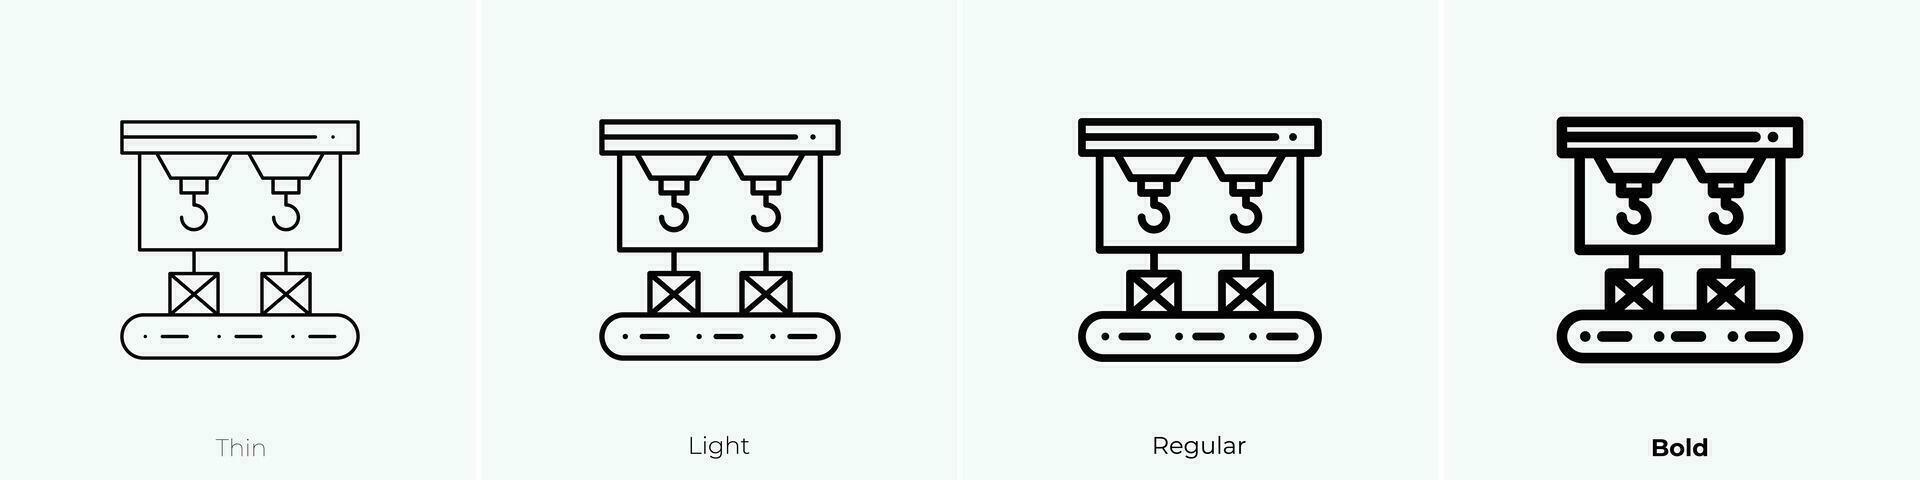 robot arm icon. Thin, Light, Regular And Bold style design isolated on white background vector